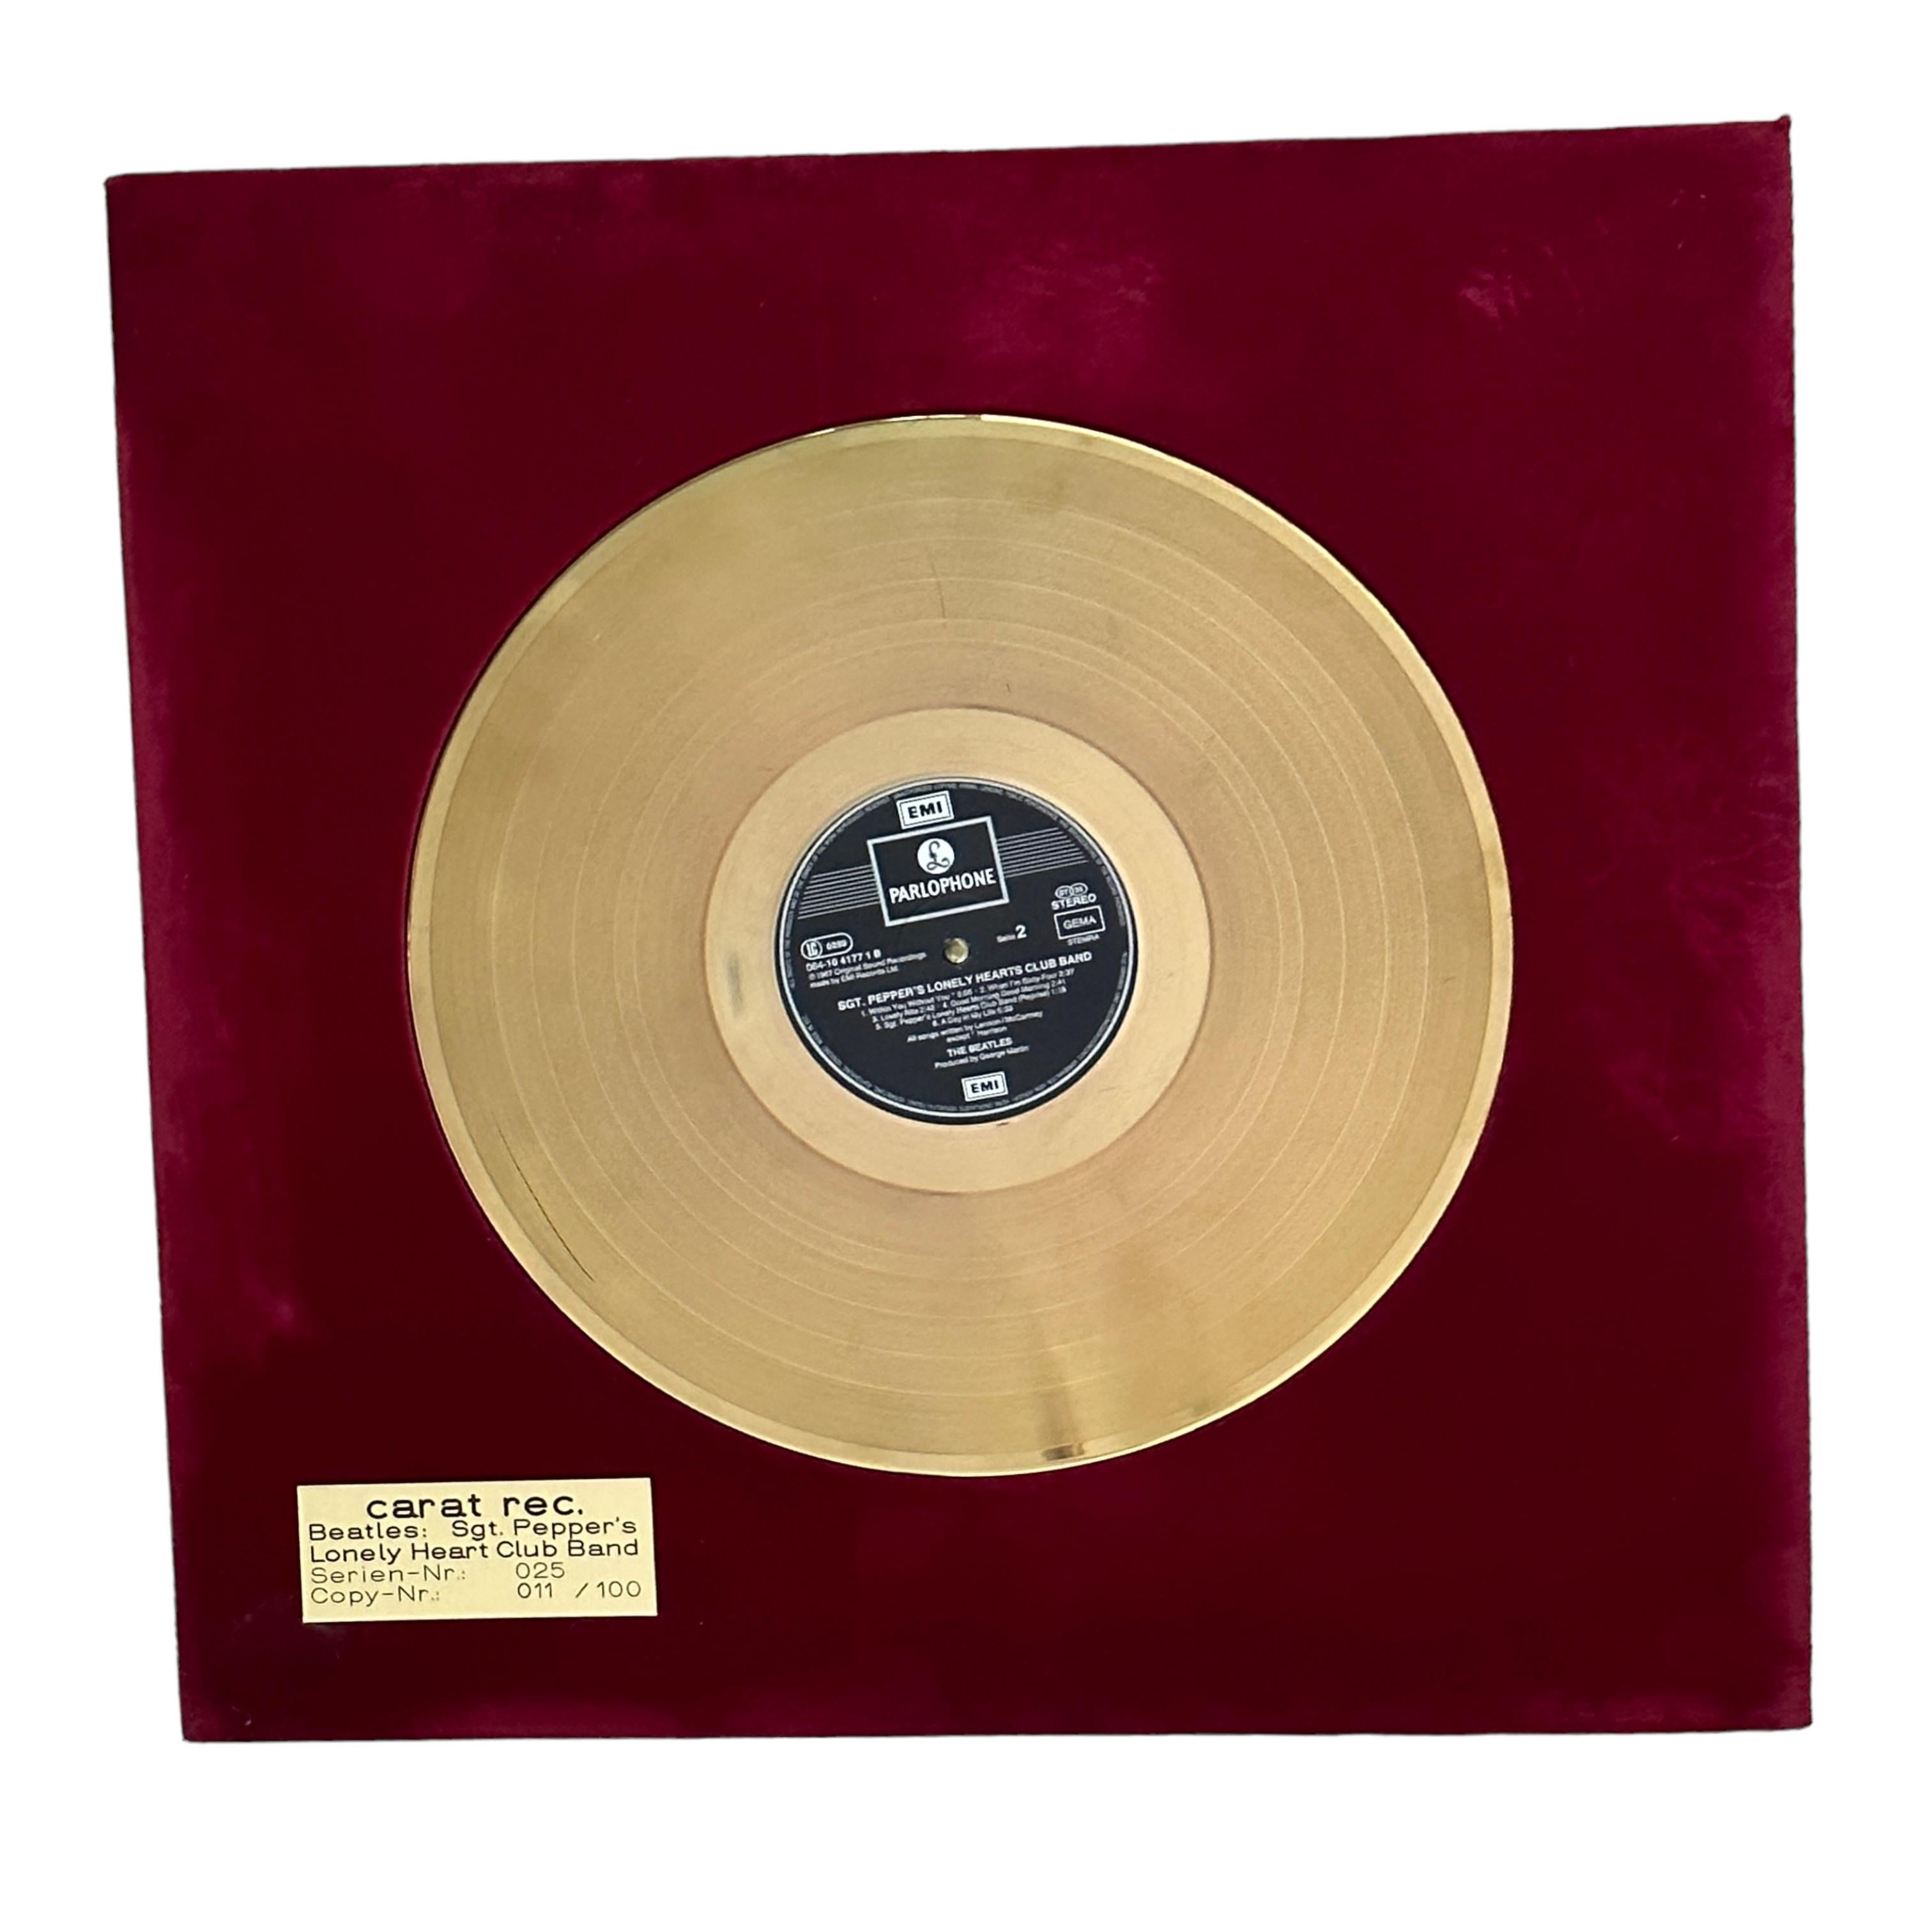 Beatles Sgt. Peppers Lonely Hearts Club Band Golden Record Carat Rec 011/100 For Sale 8